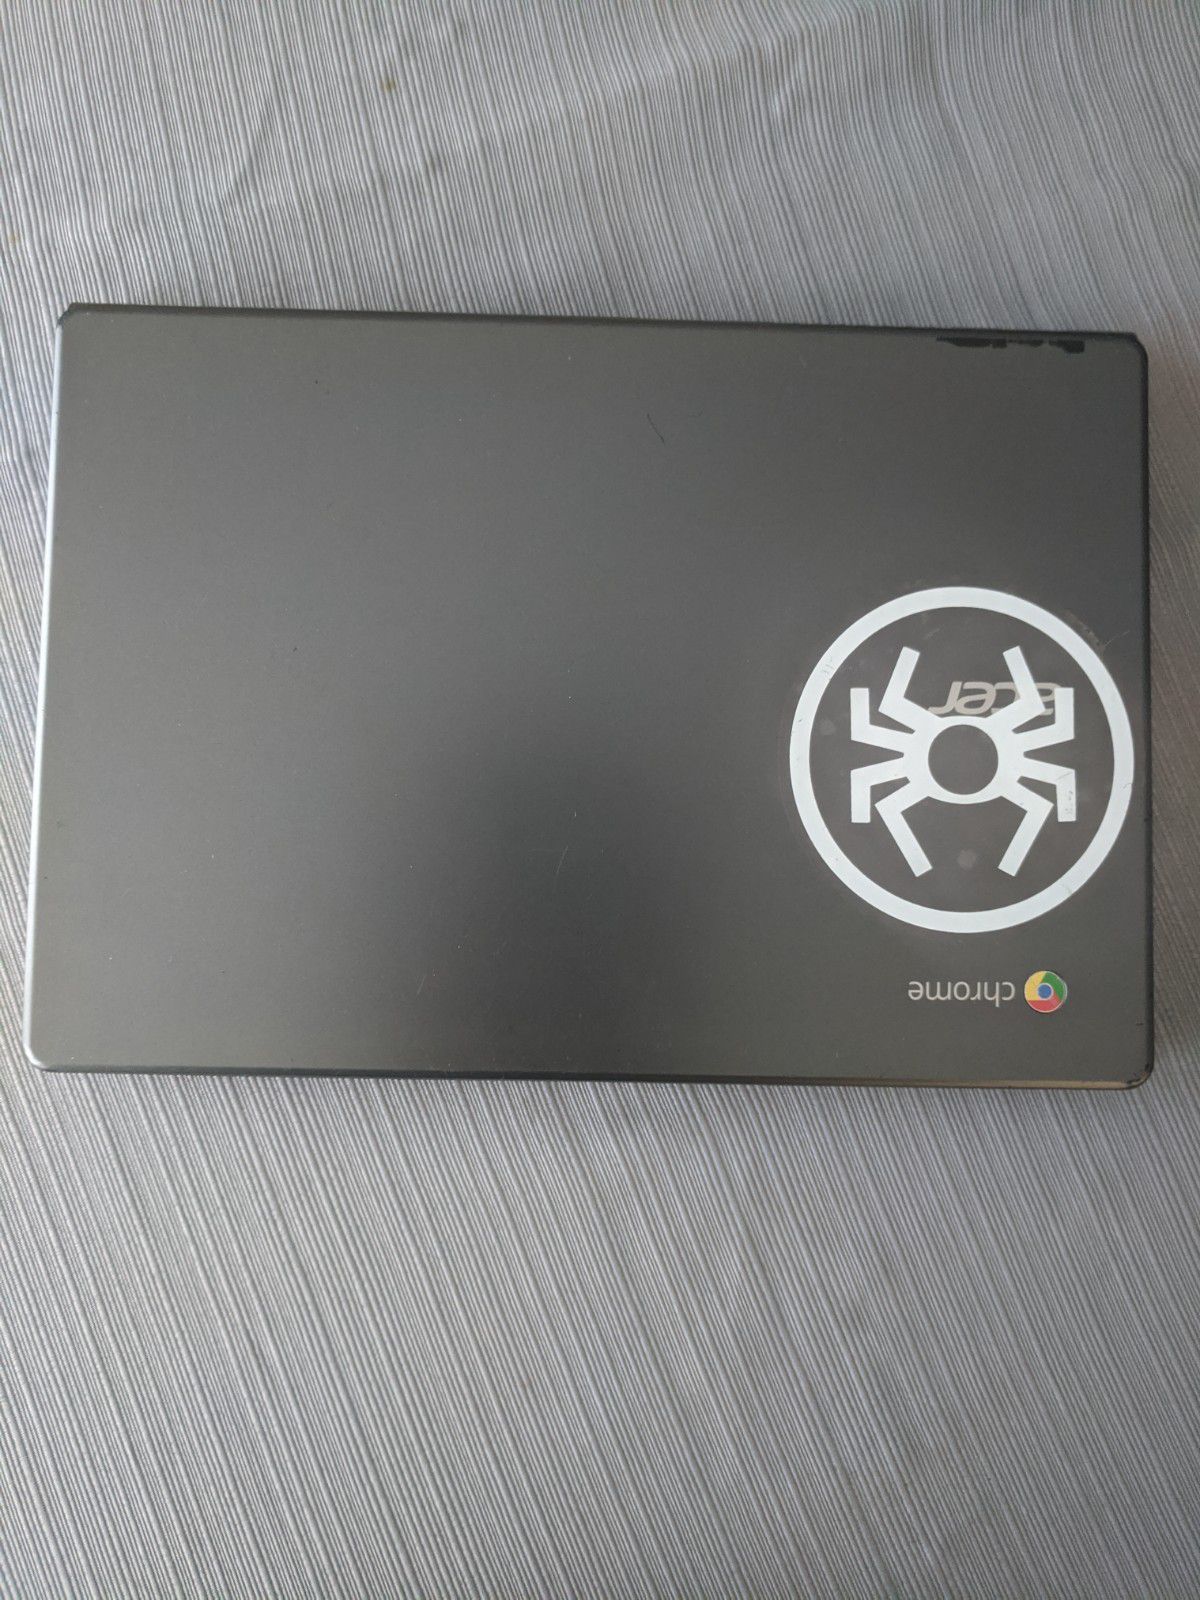 Awesome Chromebook Acer Computer